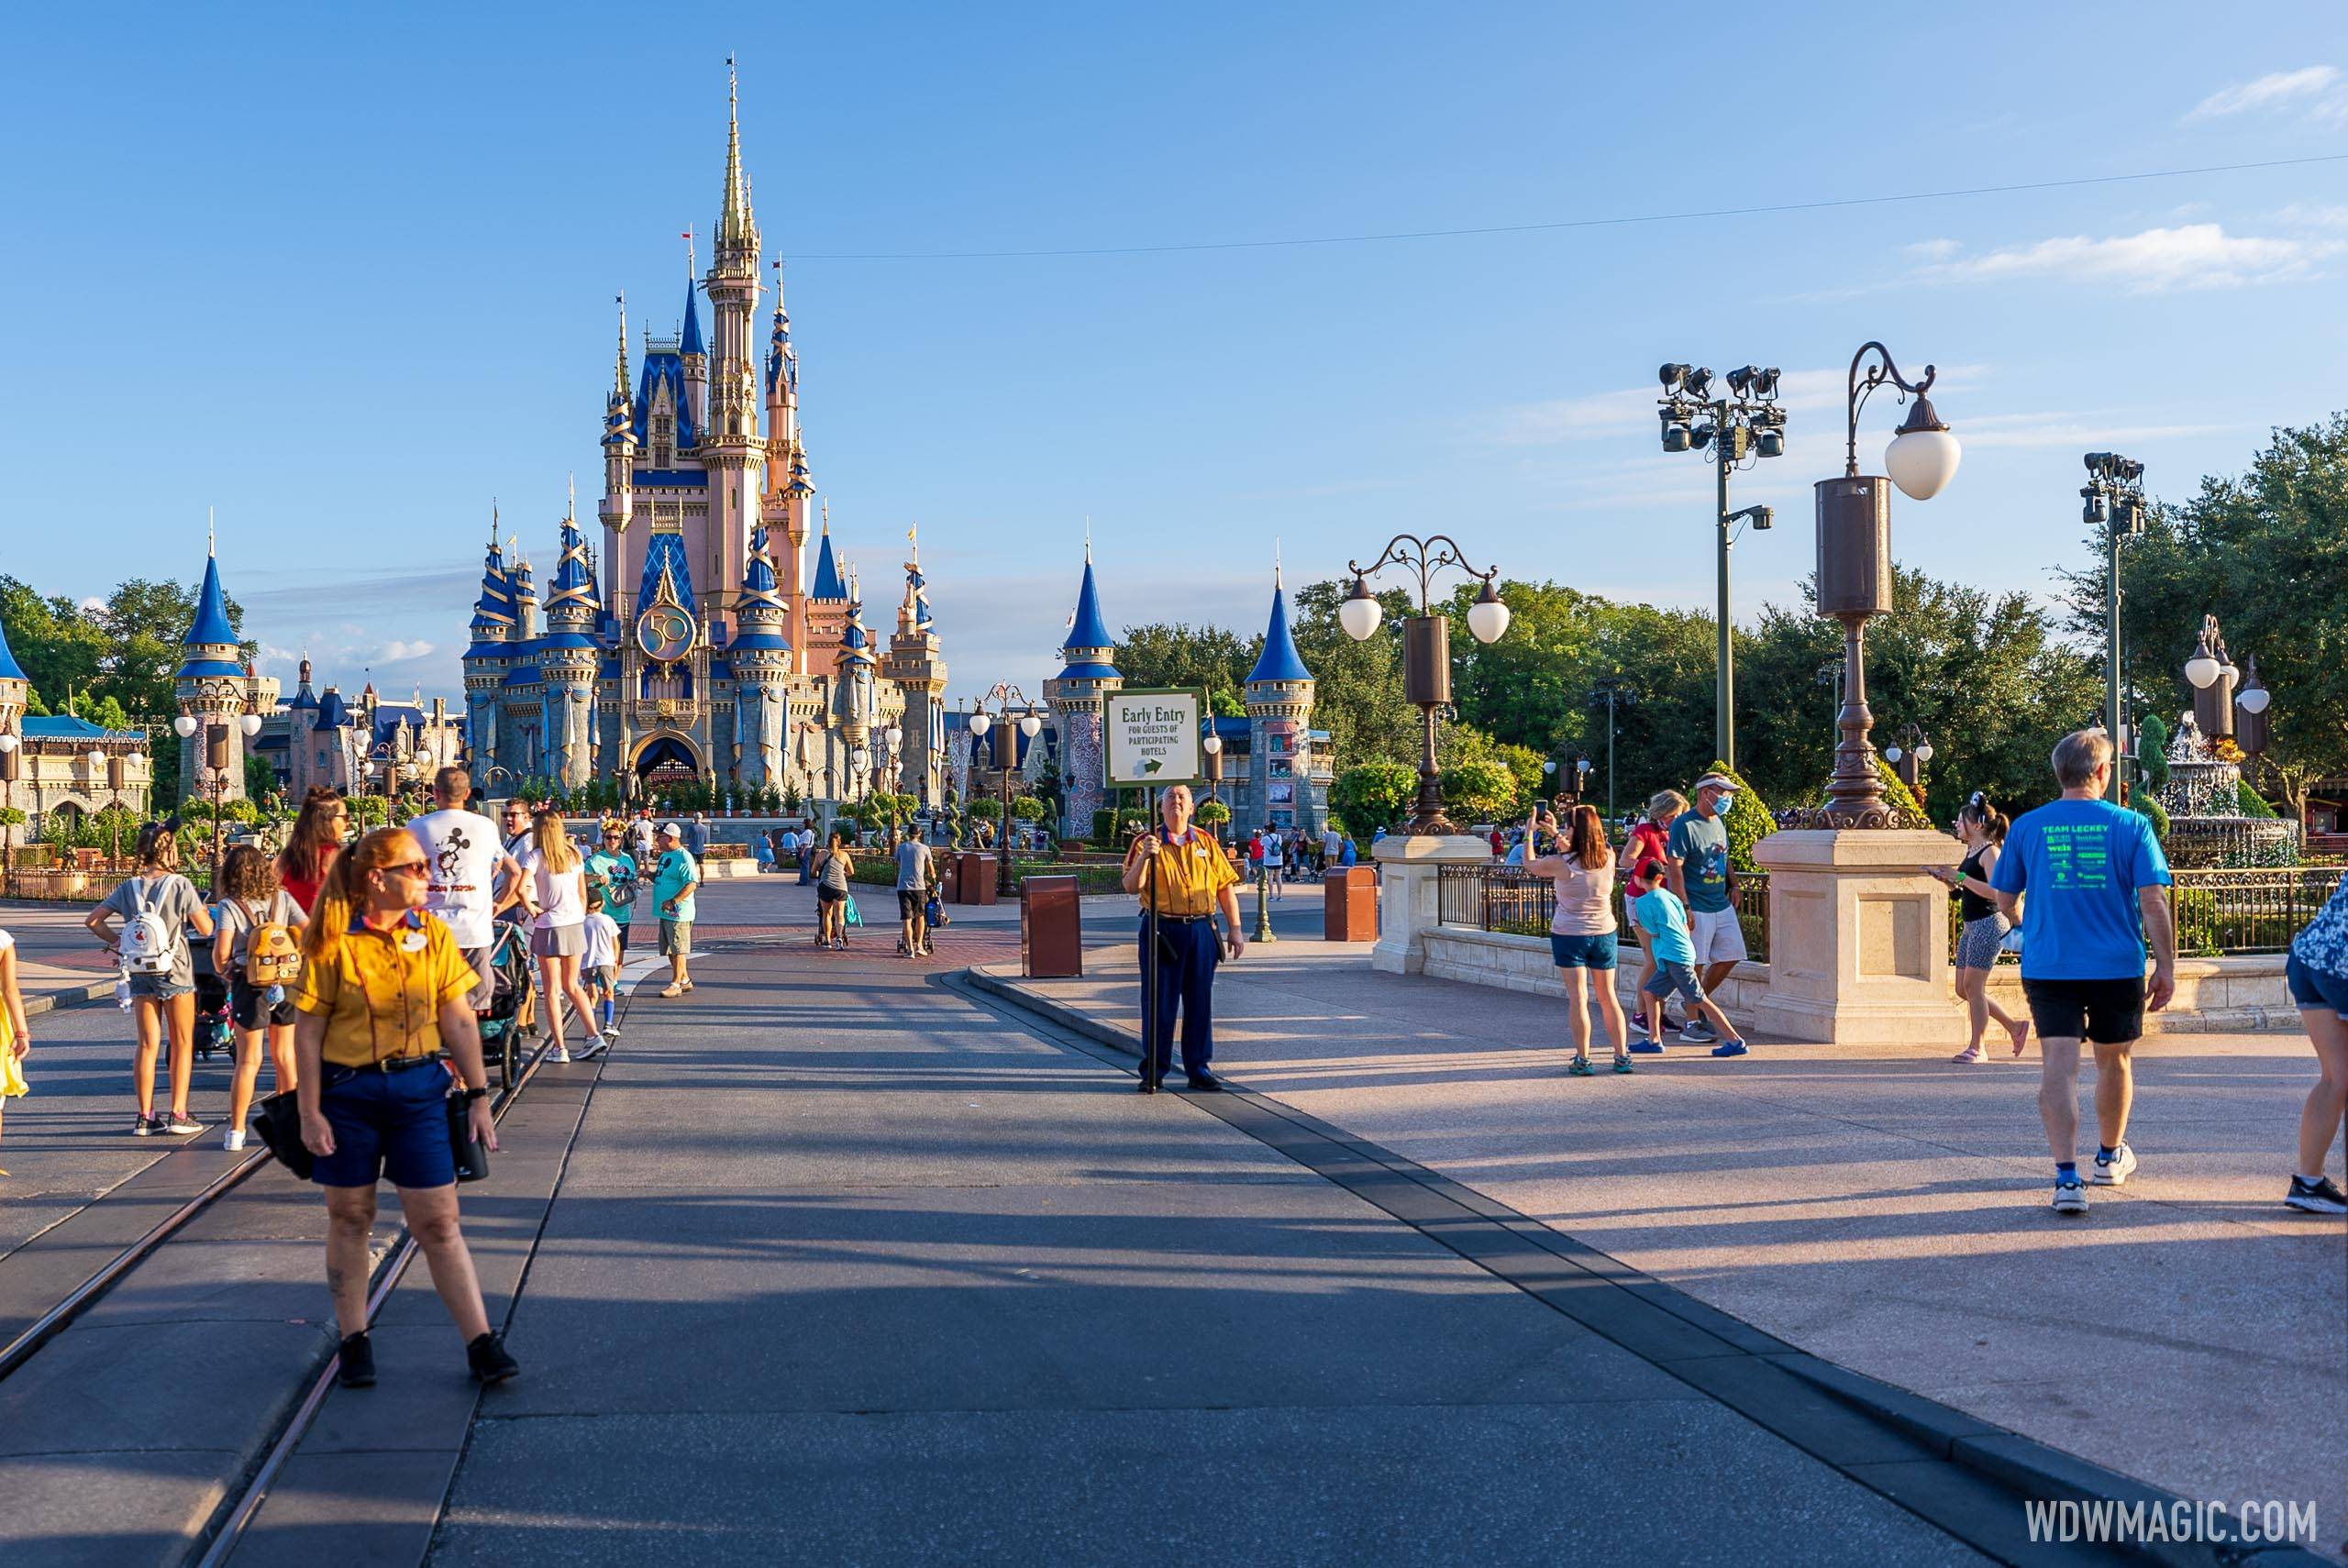 Another offsite hotel joins Disney hotels for Early Morning Hours at Walt Disney World theme parks through 2024